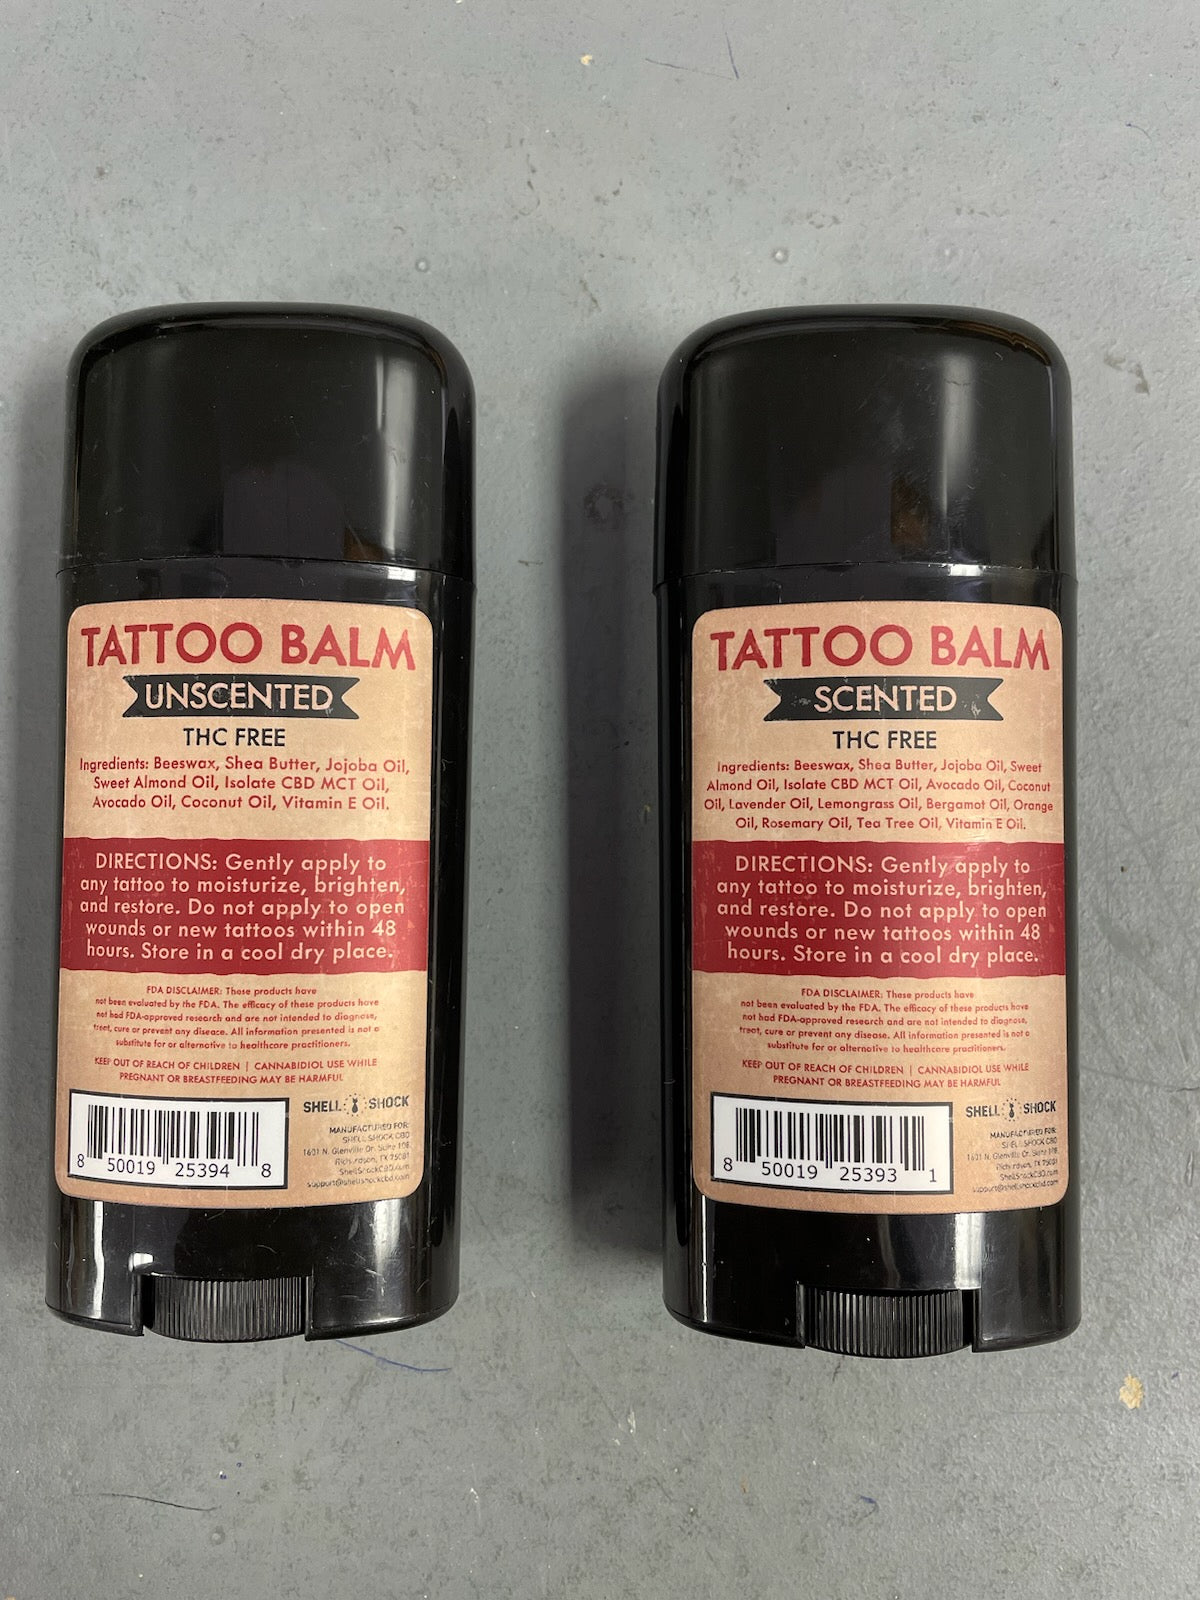 Use Essential Oils for Tattoo Healing & Aftercare | Essential 3